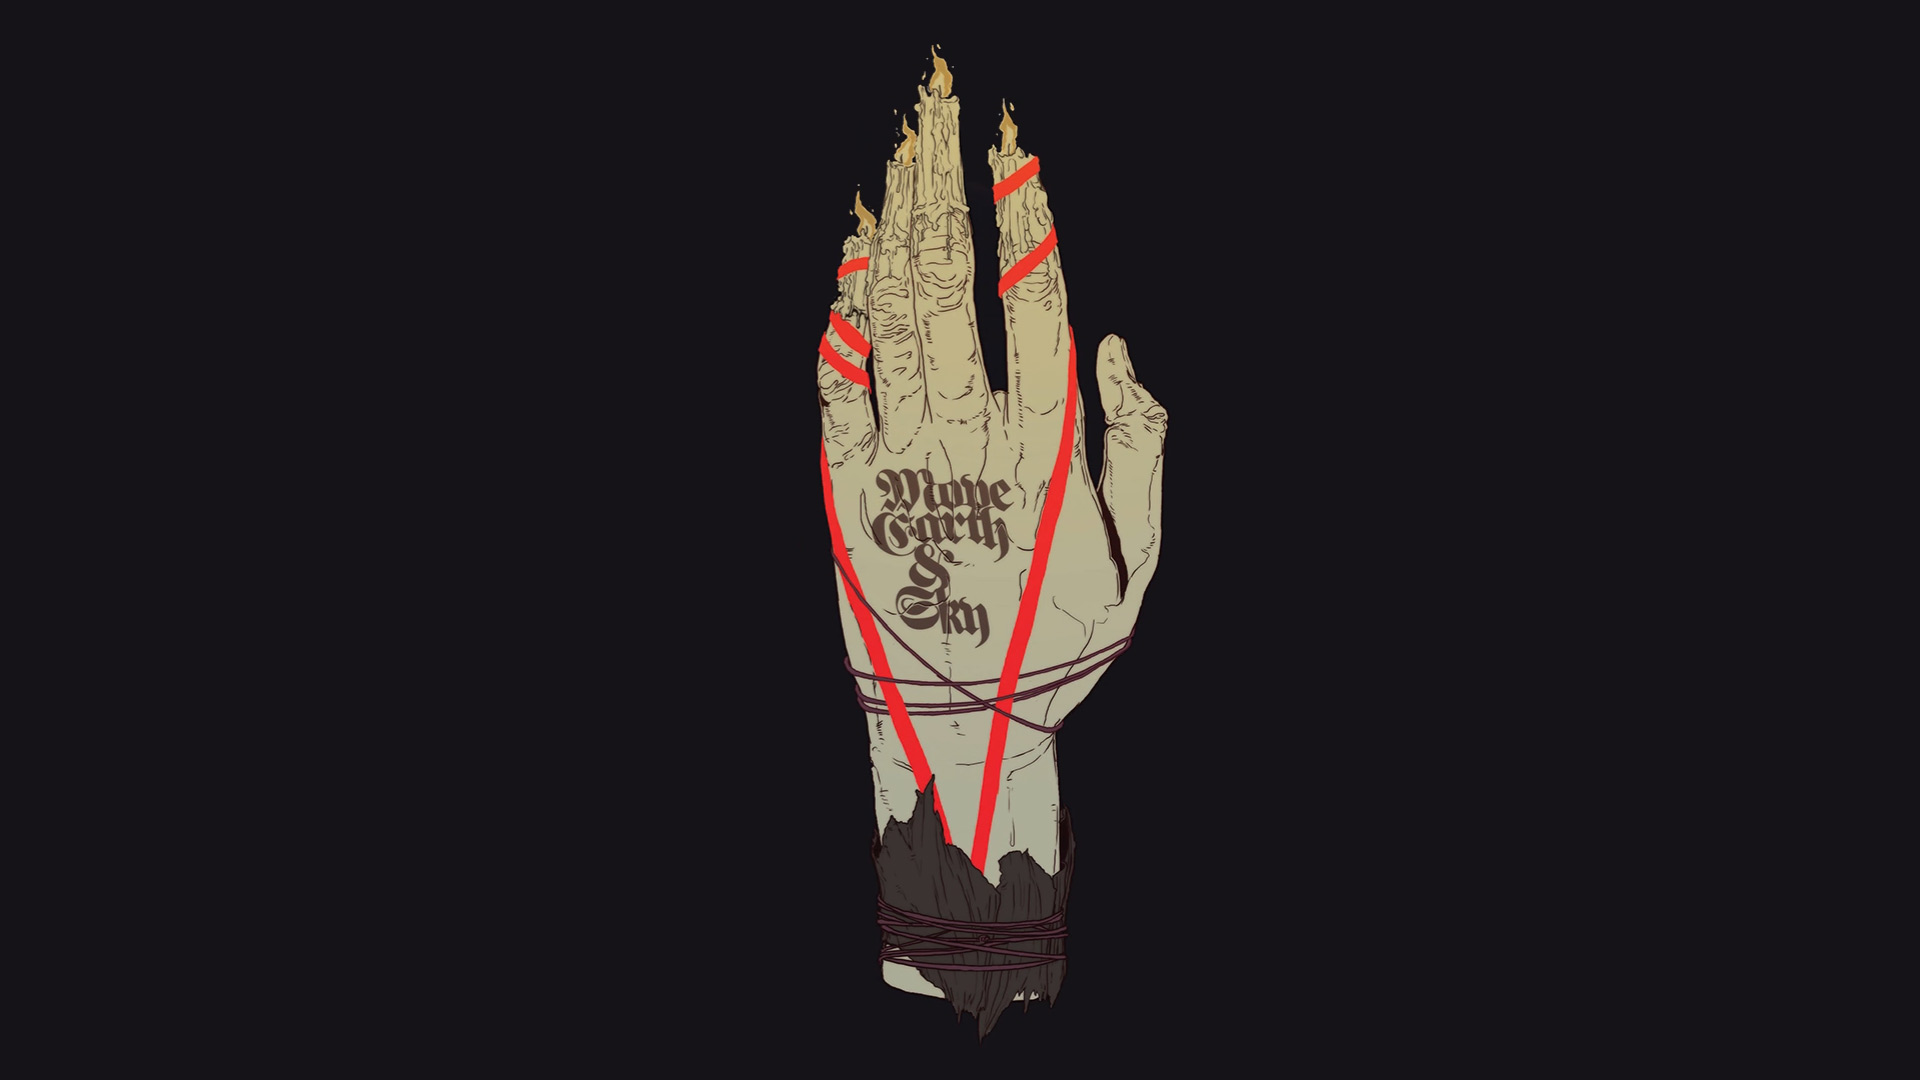 Queens Of The Stone Age Hands Simple Background Candles Hard Rock 1920x1080